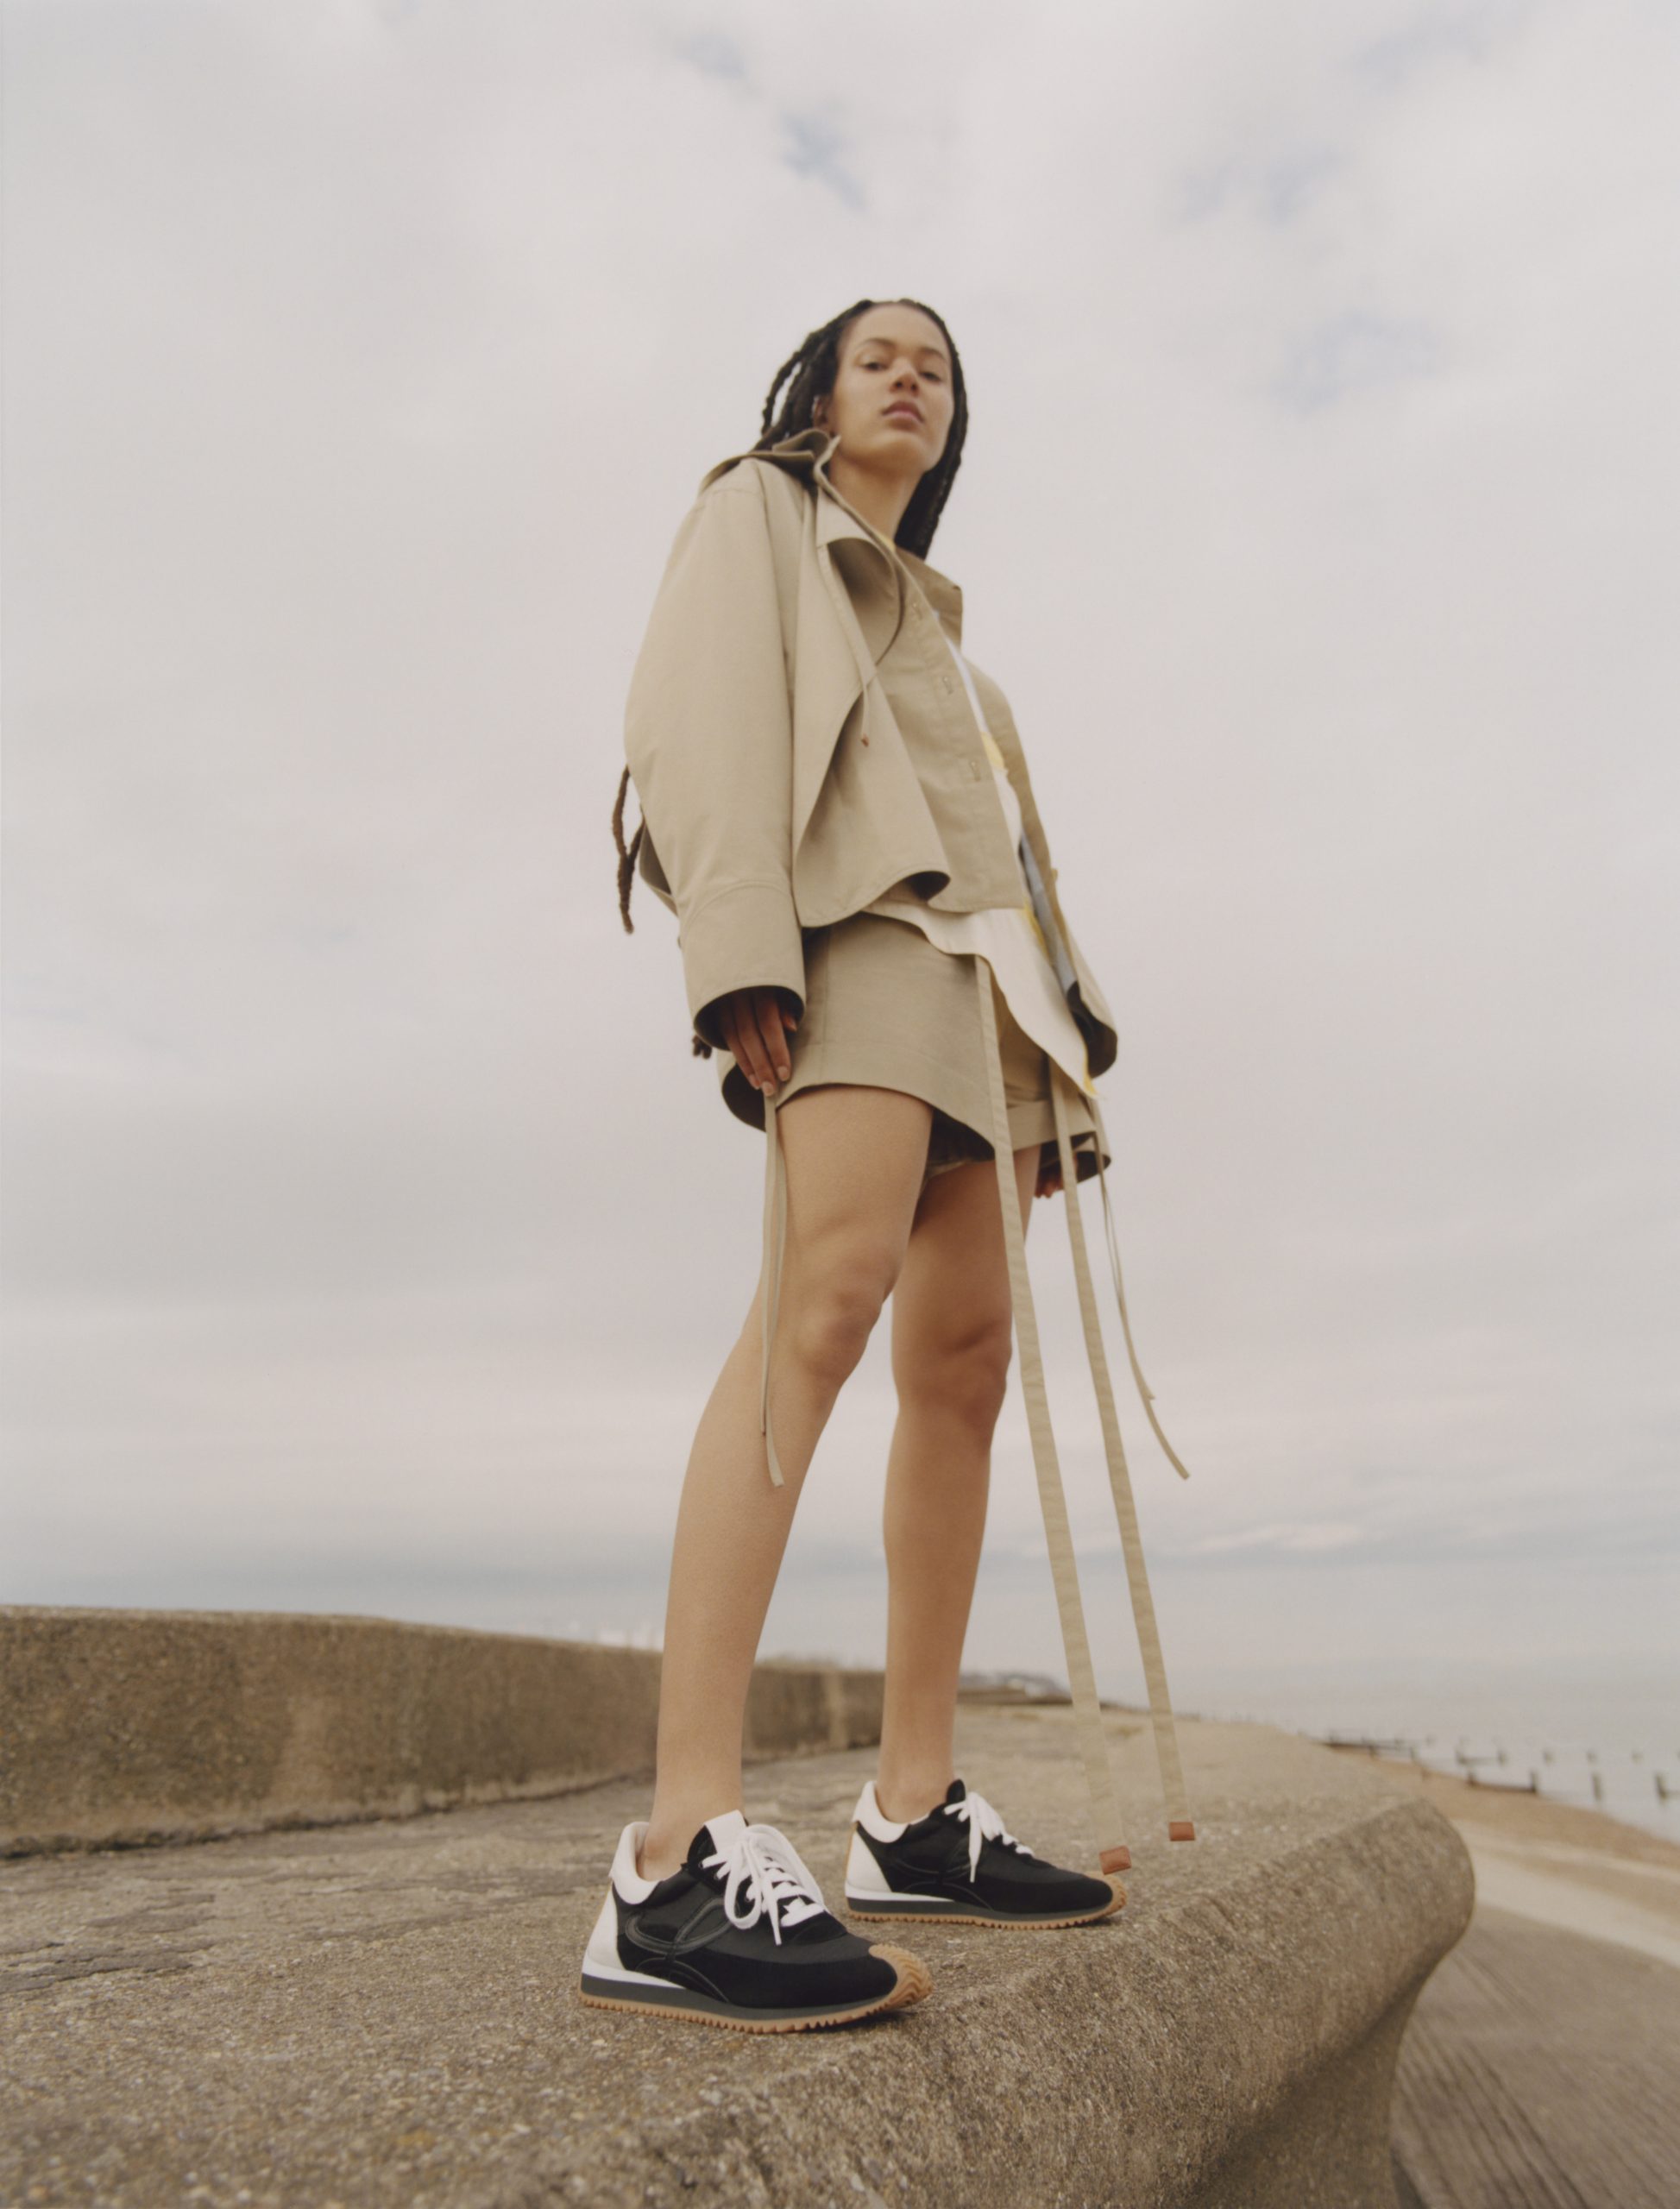 Loewe Introduces The Flow Runner Sneaker For Spring 2021 | The Impression